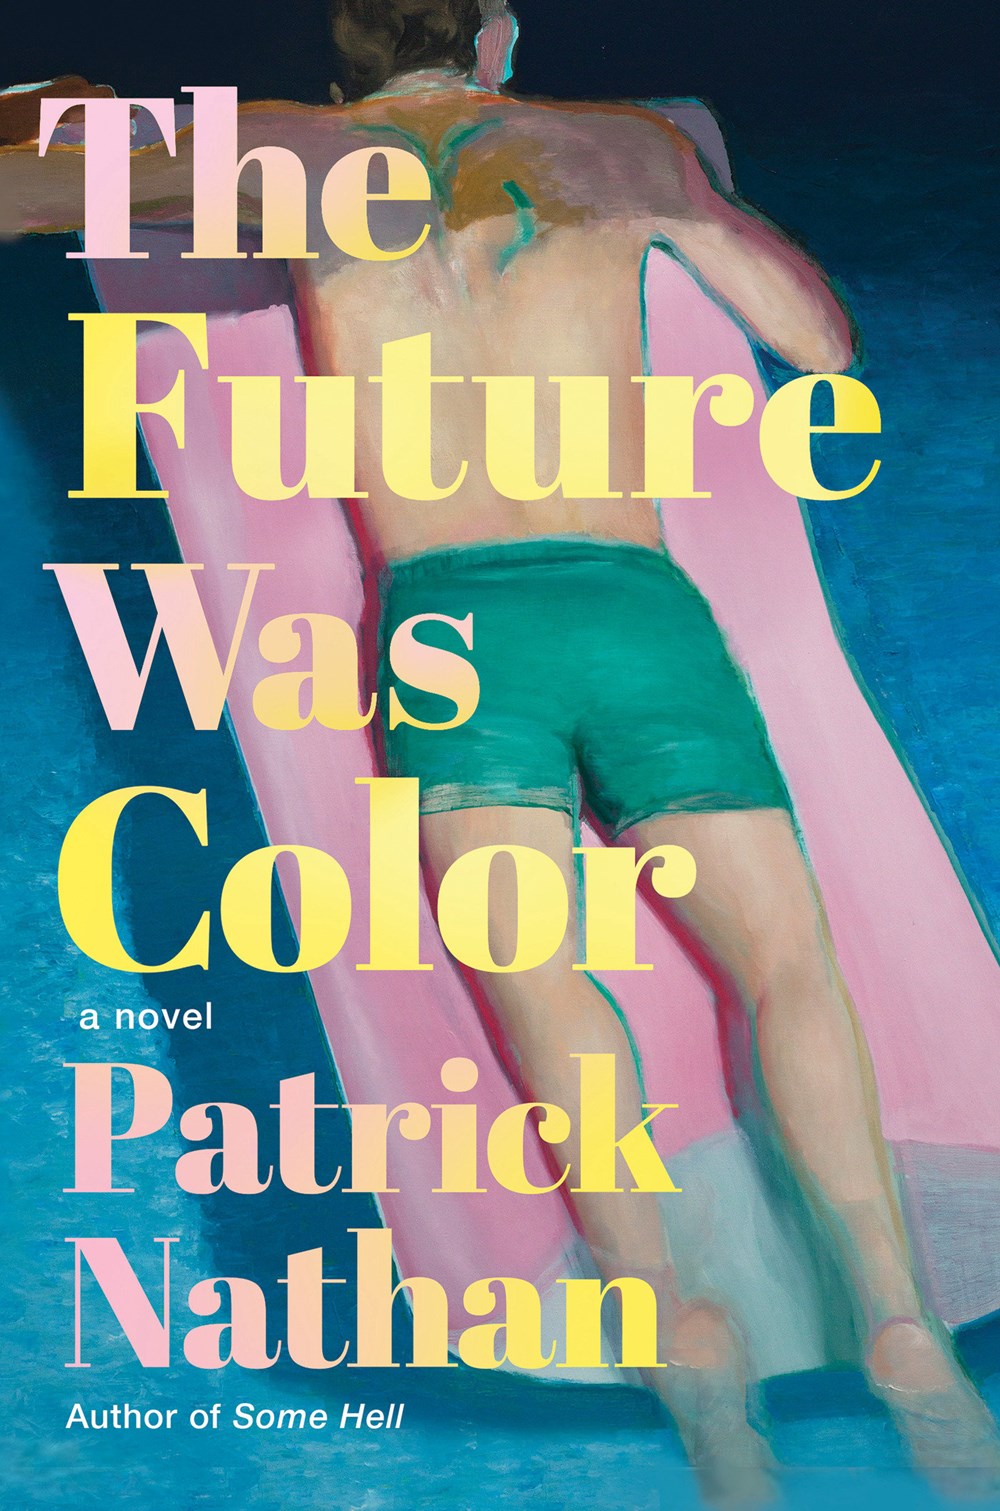 Image for "The Future Was Color"